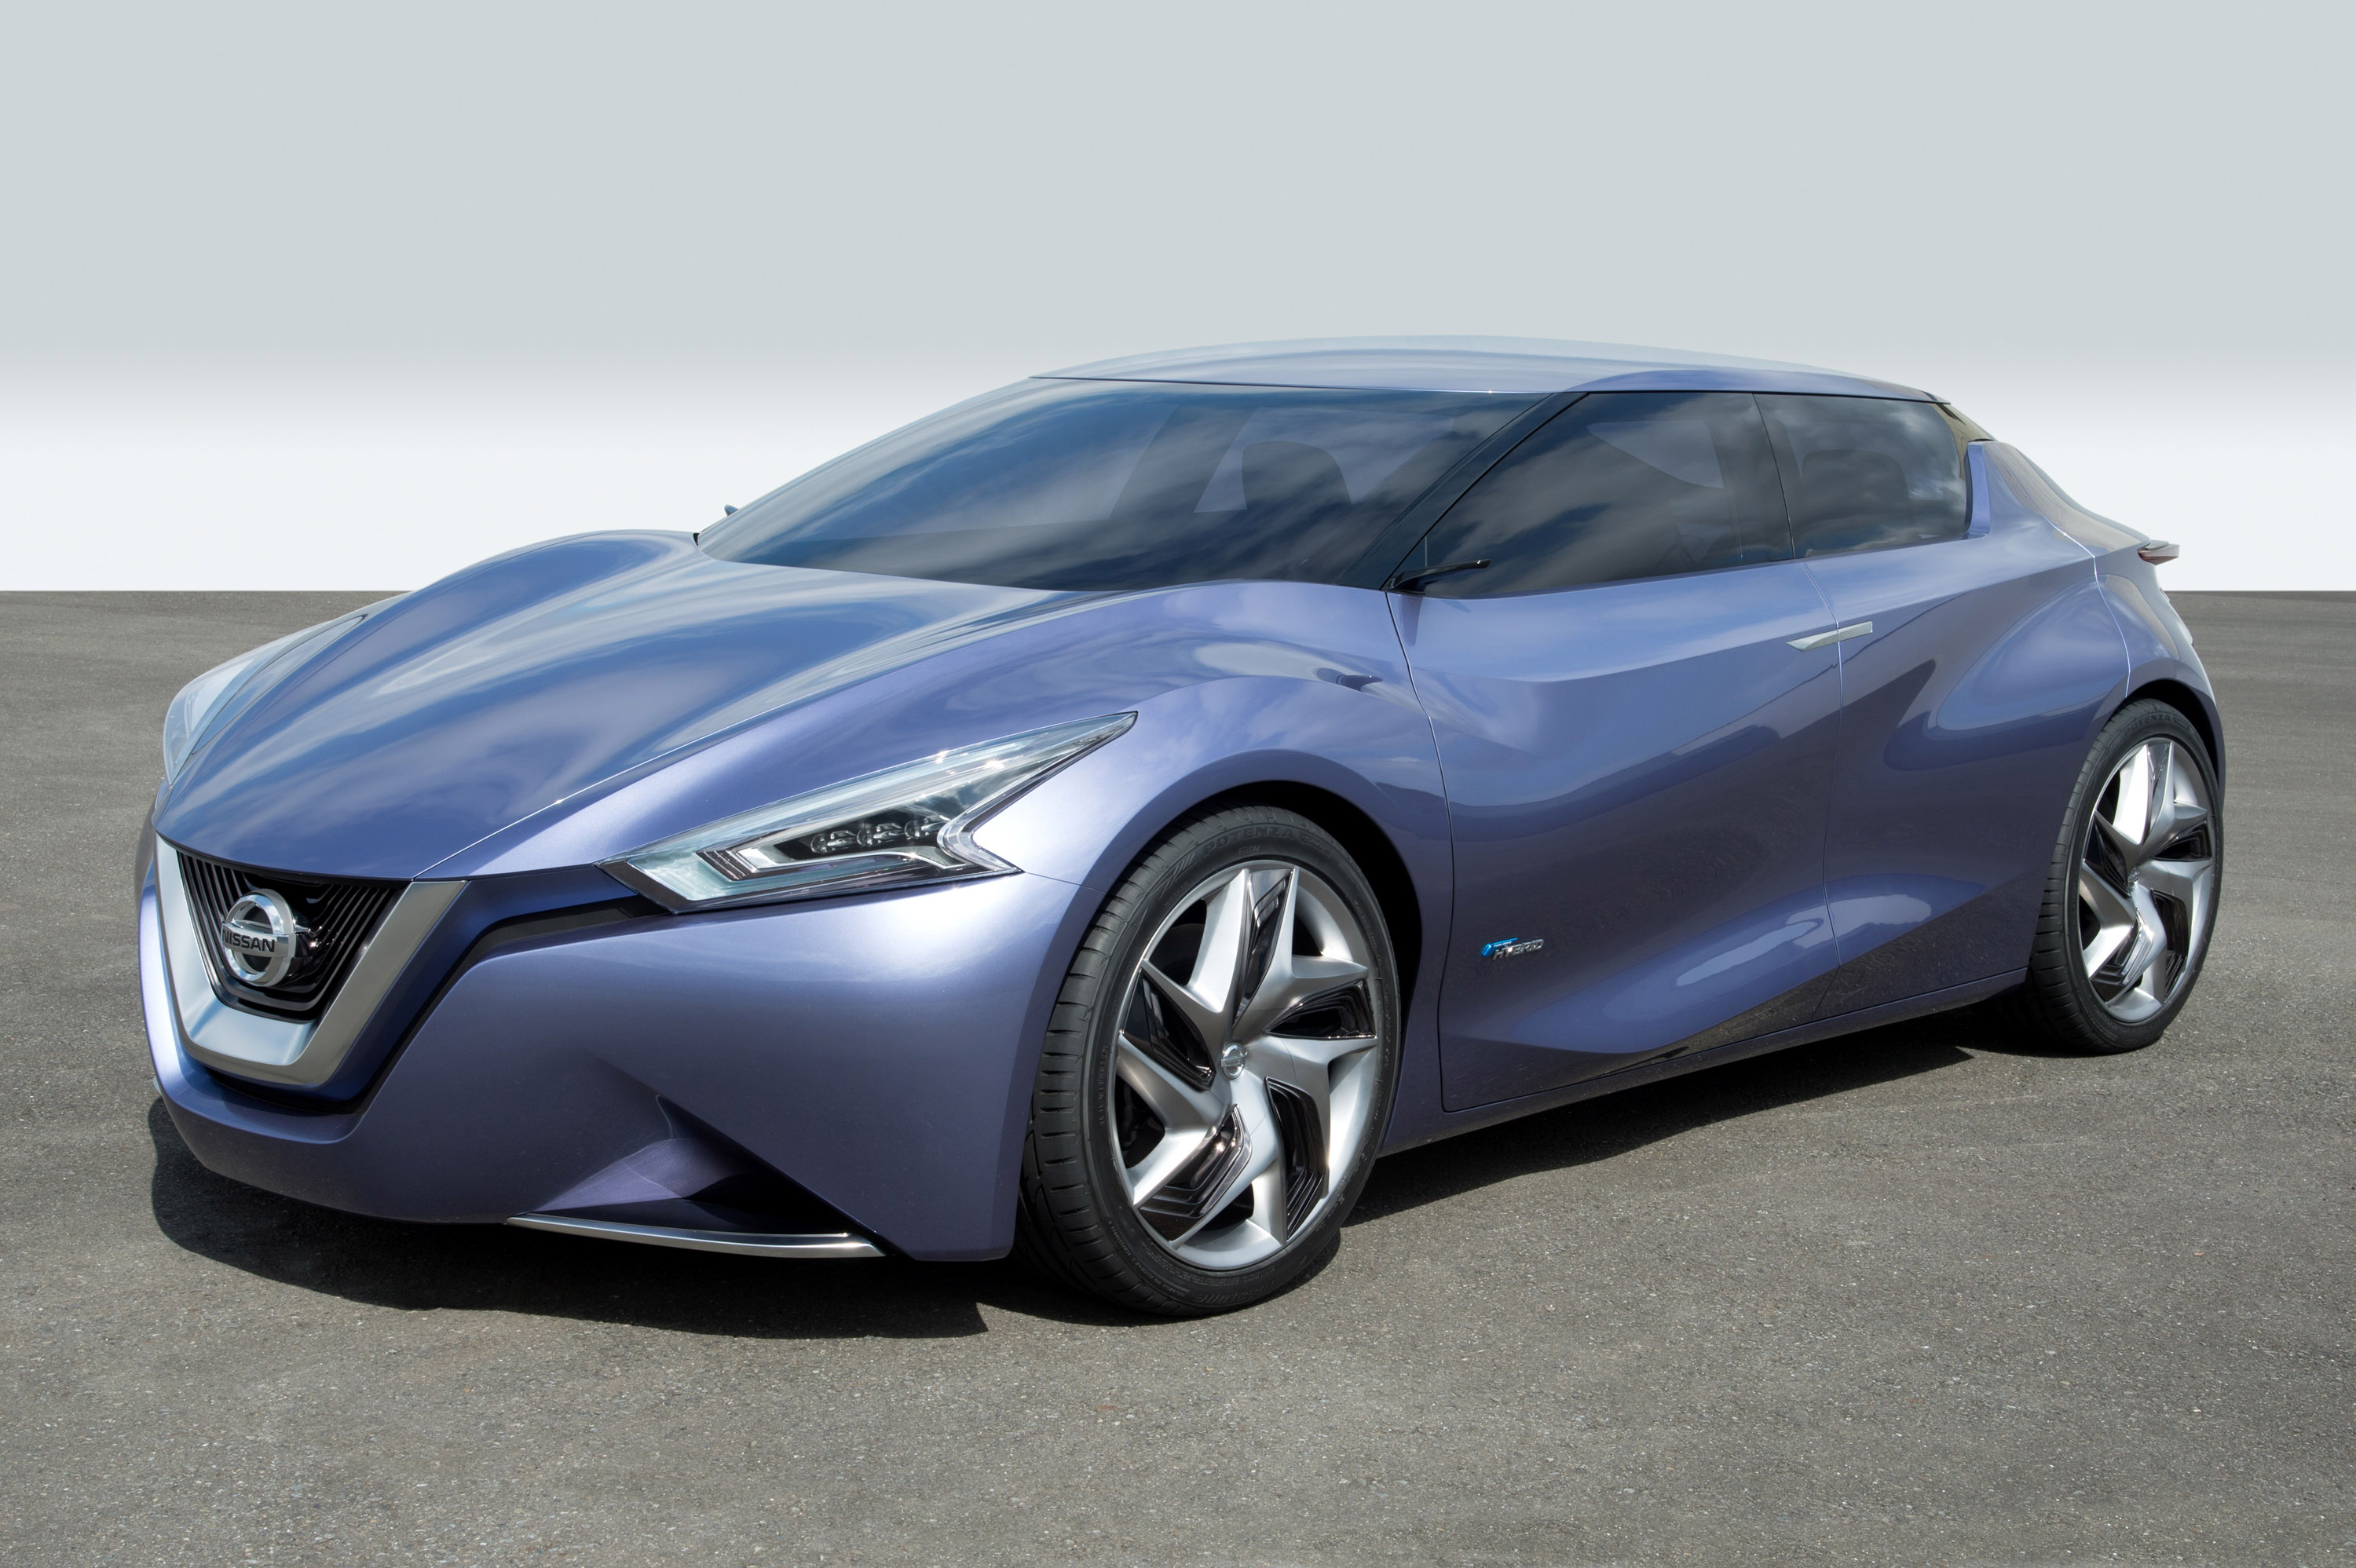 HQ Nissan Concept Wallpapers | File 878.09Kb